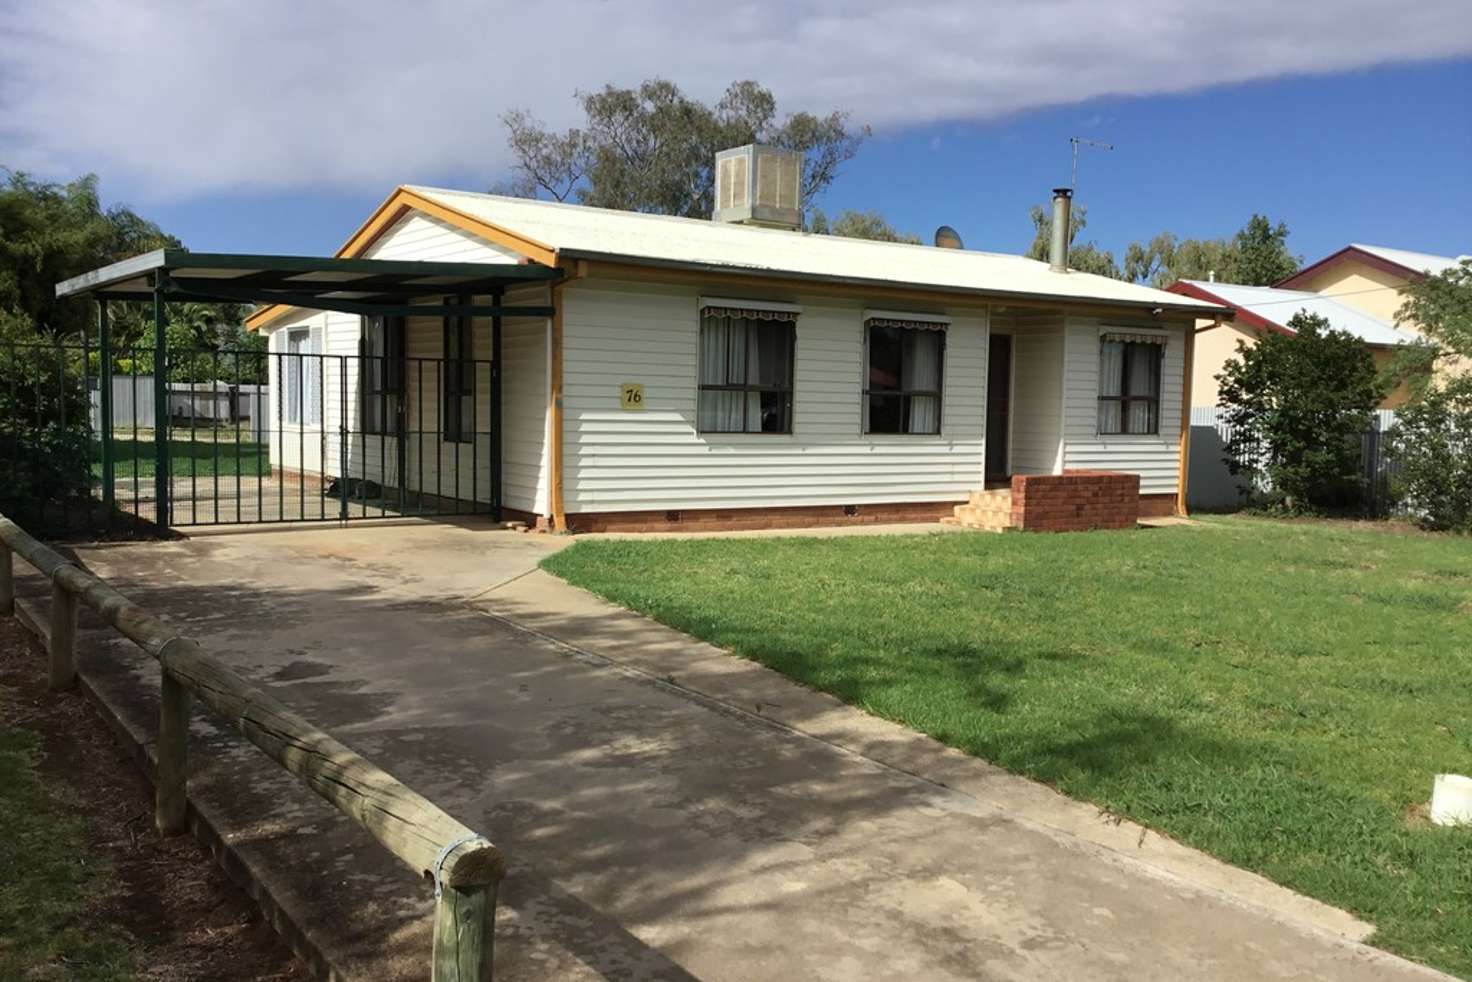 Main view of Homely house listing, 76 MAHONGA STREET, Jerilderie NSW 2716